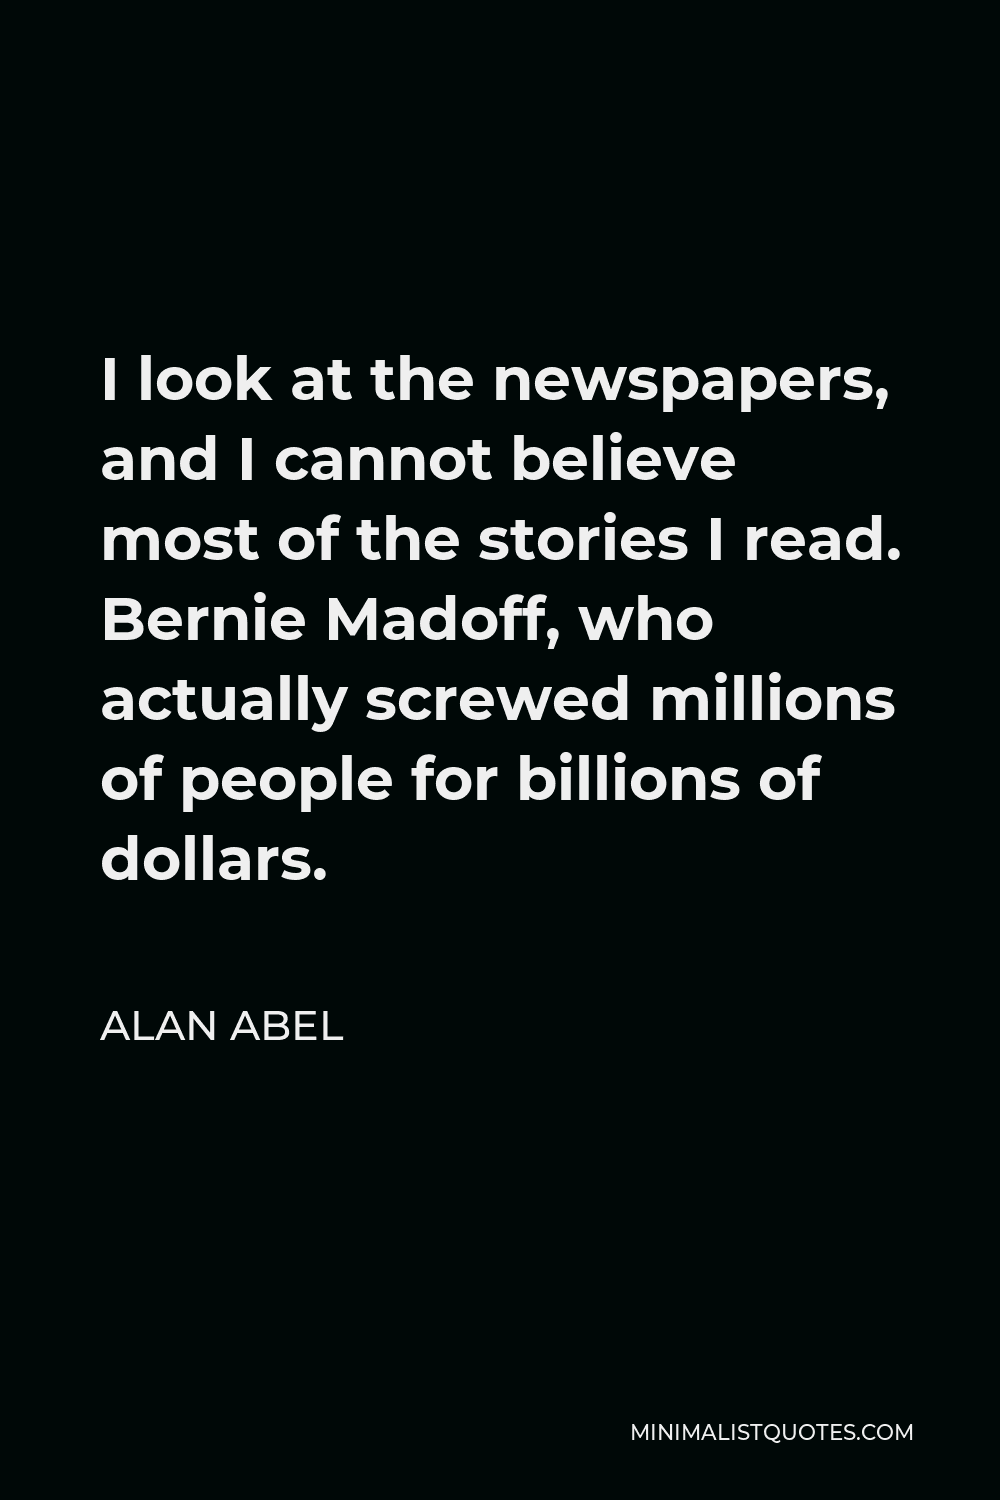 Alan Abel Quote - I look at the newspapers, and I cannot believe most of the stories I read. Bernie Madoff, who actually screwed millions of people for billions of dollars.